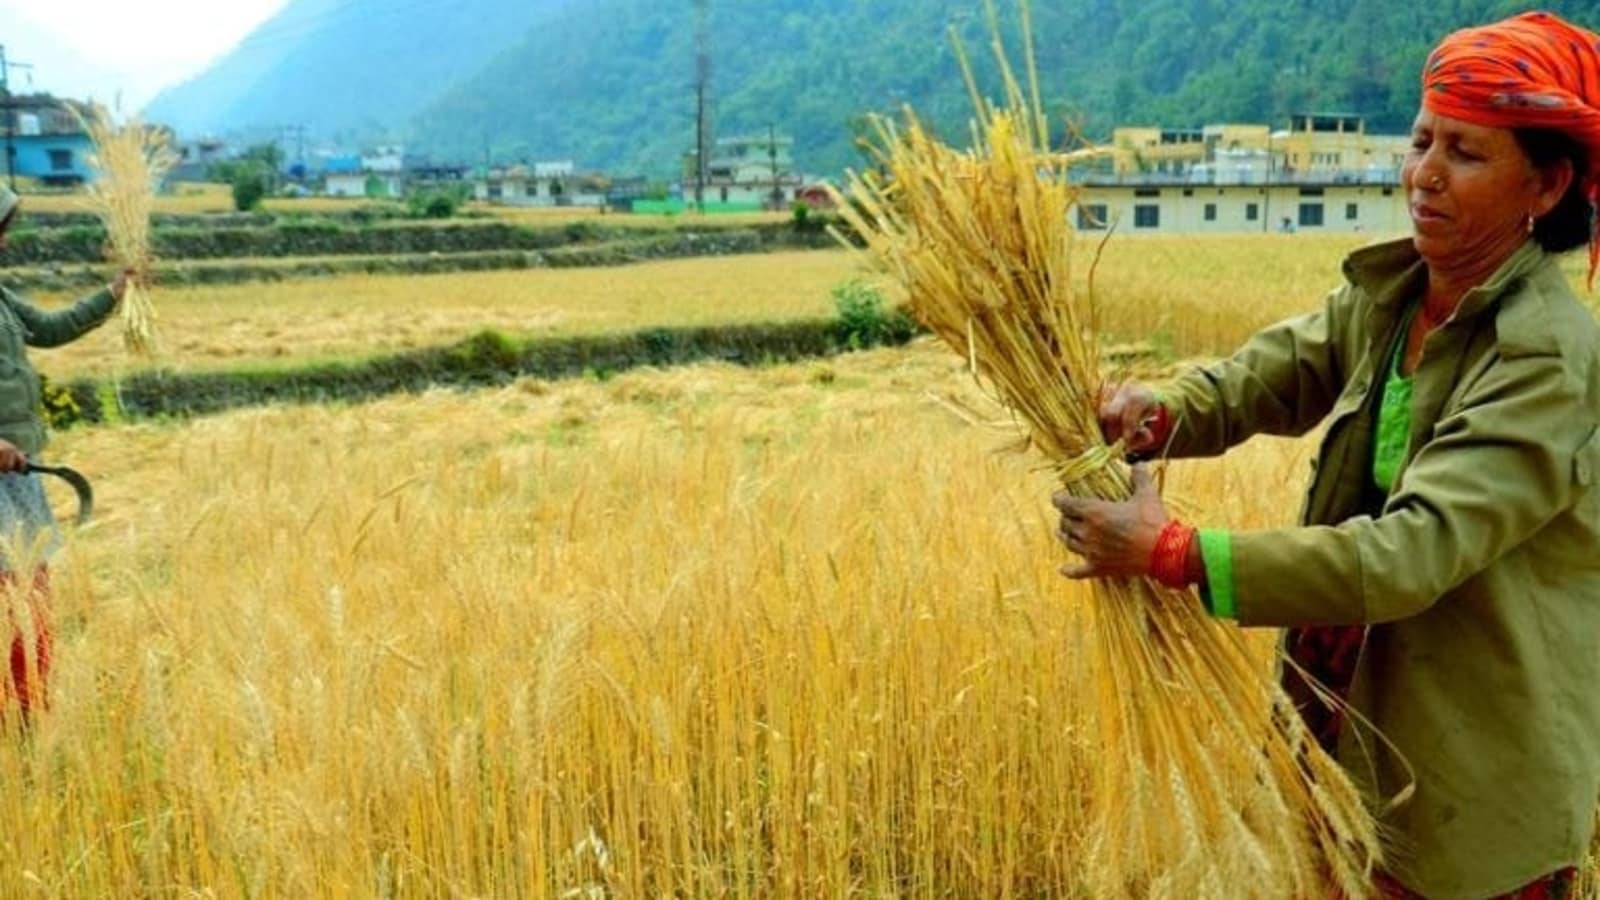 In an apparent bid to curb local price surge, India has temporarily banned wheat exports with immediate effect. The country - the world's second-bigge